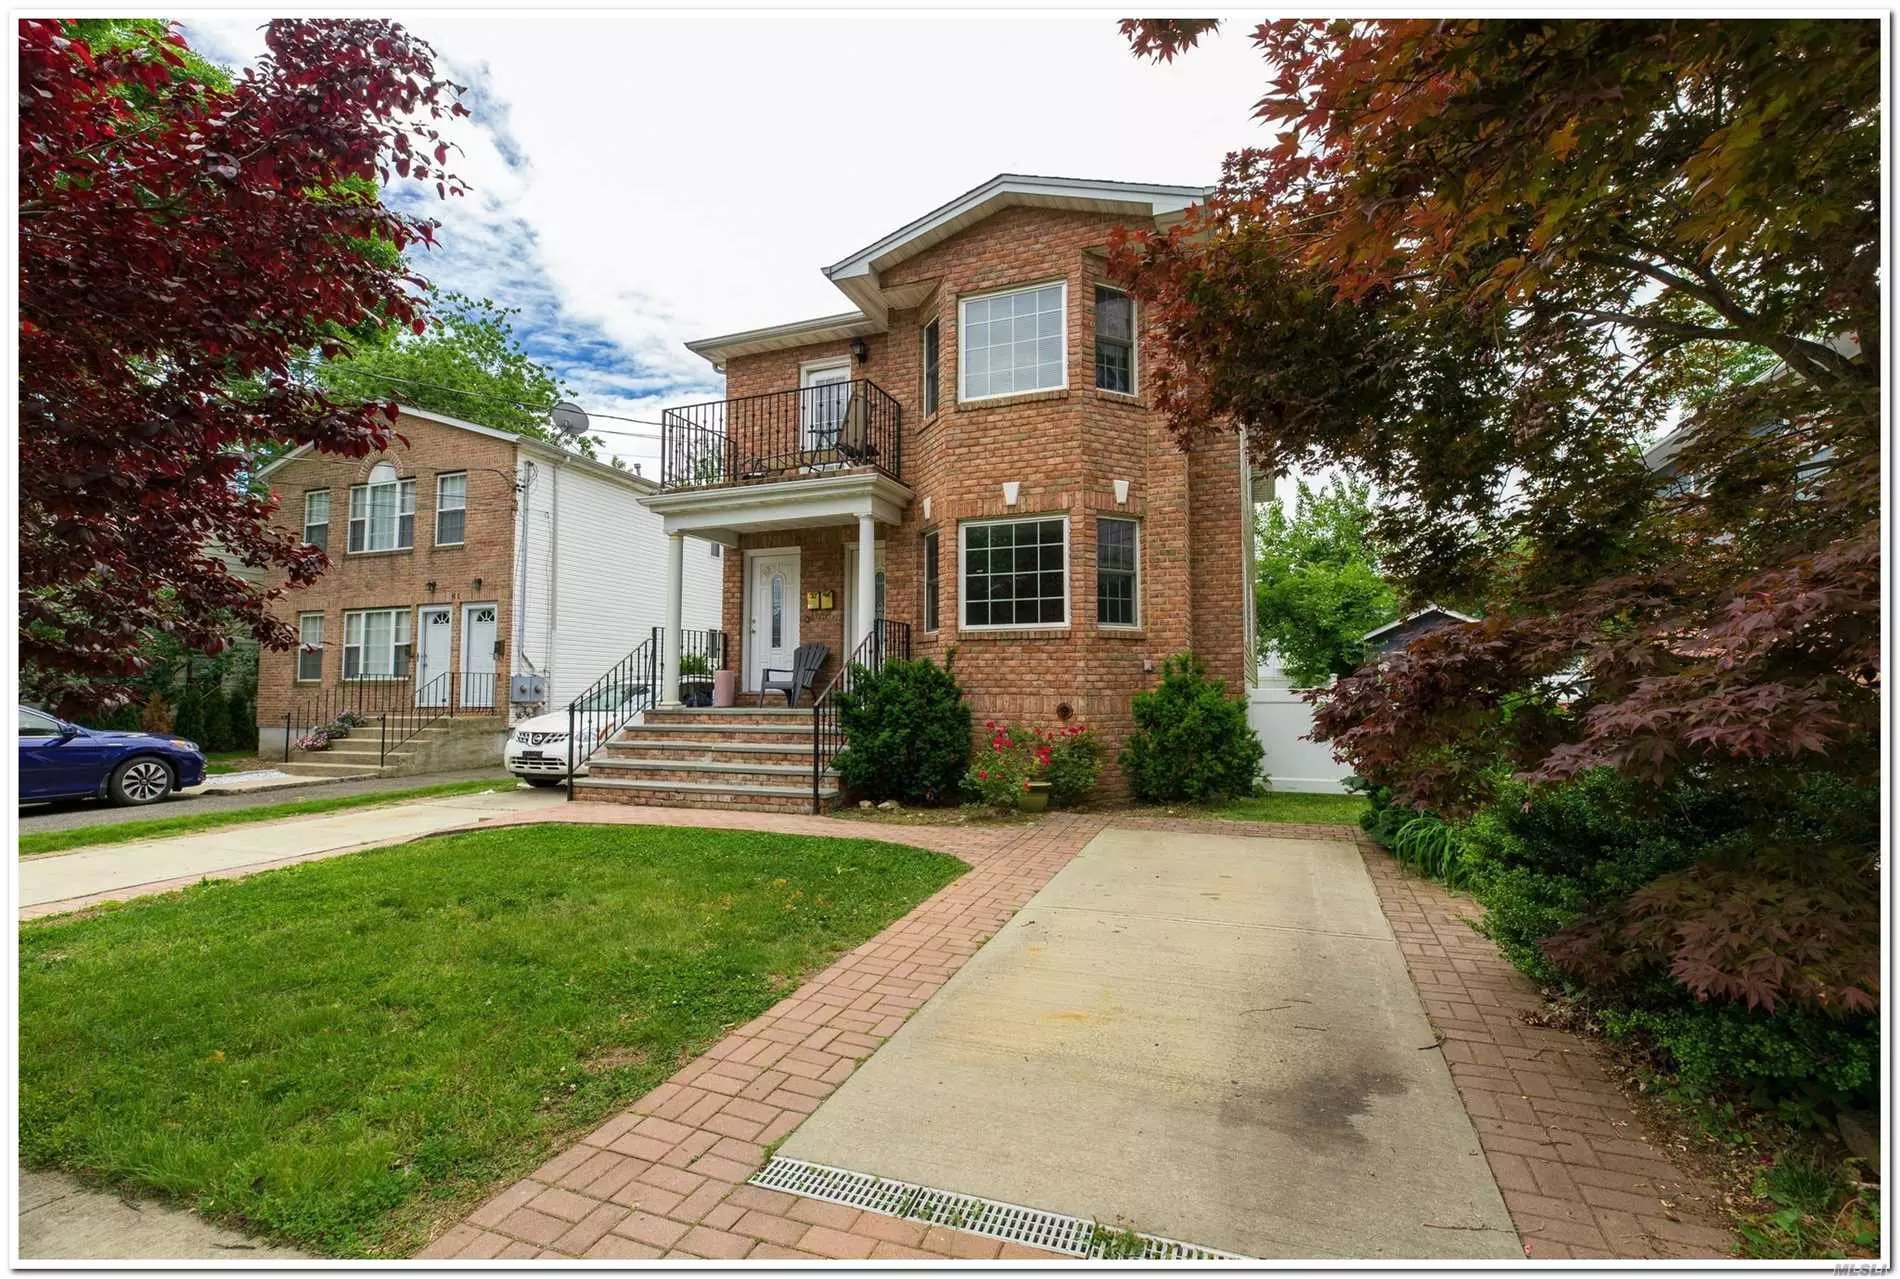 Sunny 2 Bedroom Unit With Open Living Room/Dining Room And Large Kitchen. Hardwood Floors Throughout. Washer/Dryer In Unit. Full Basement. Private Driveway. Plenty Of Windows. Use Of Beautiful Backyard.